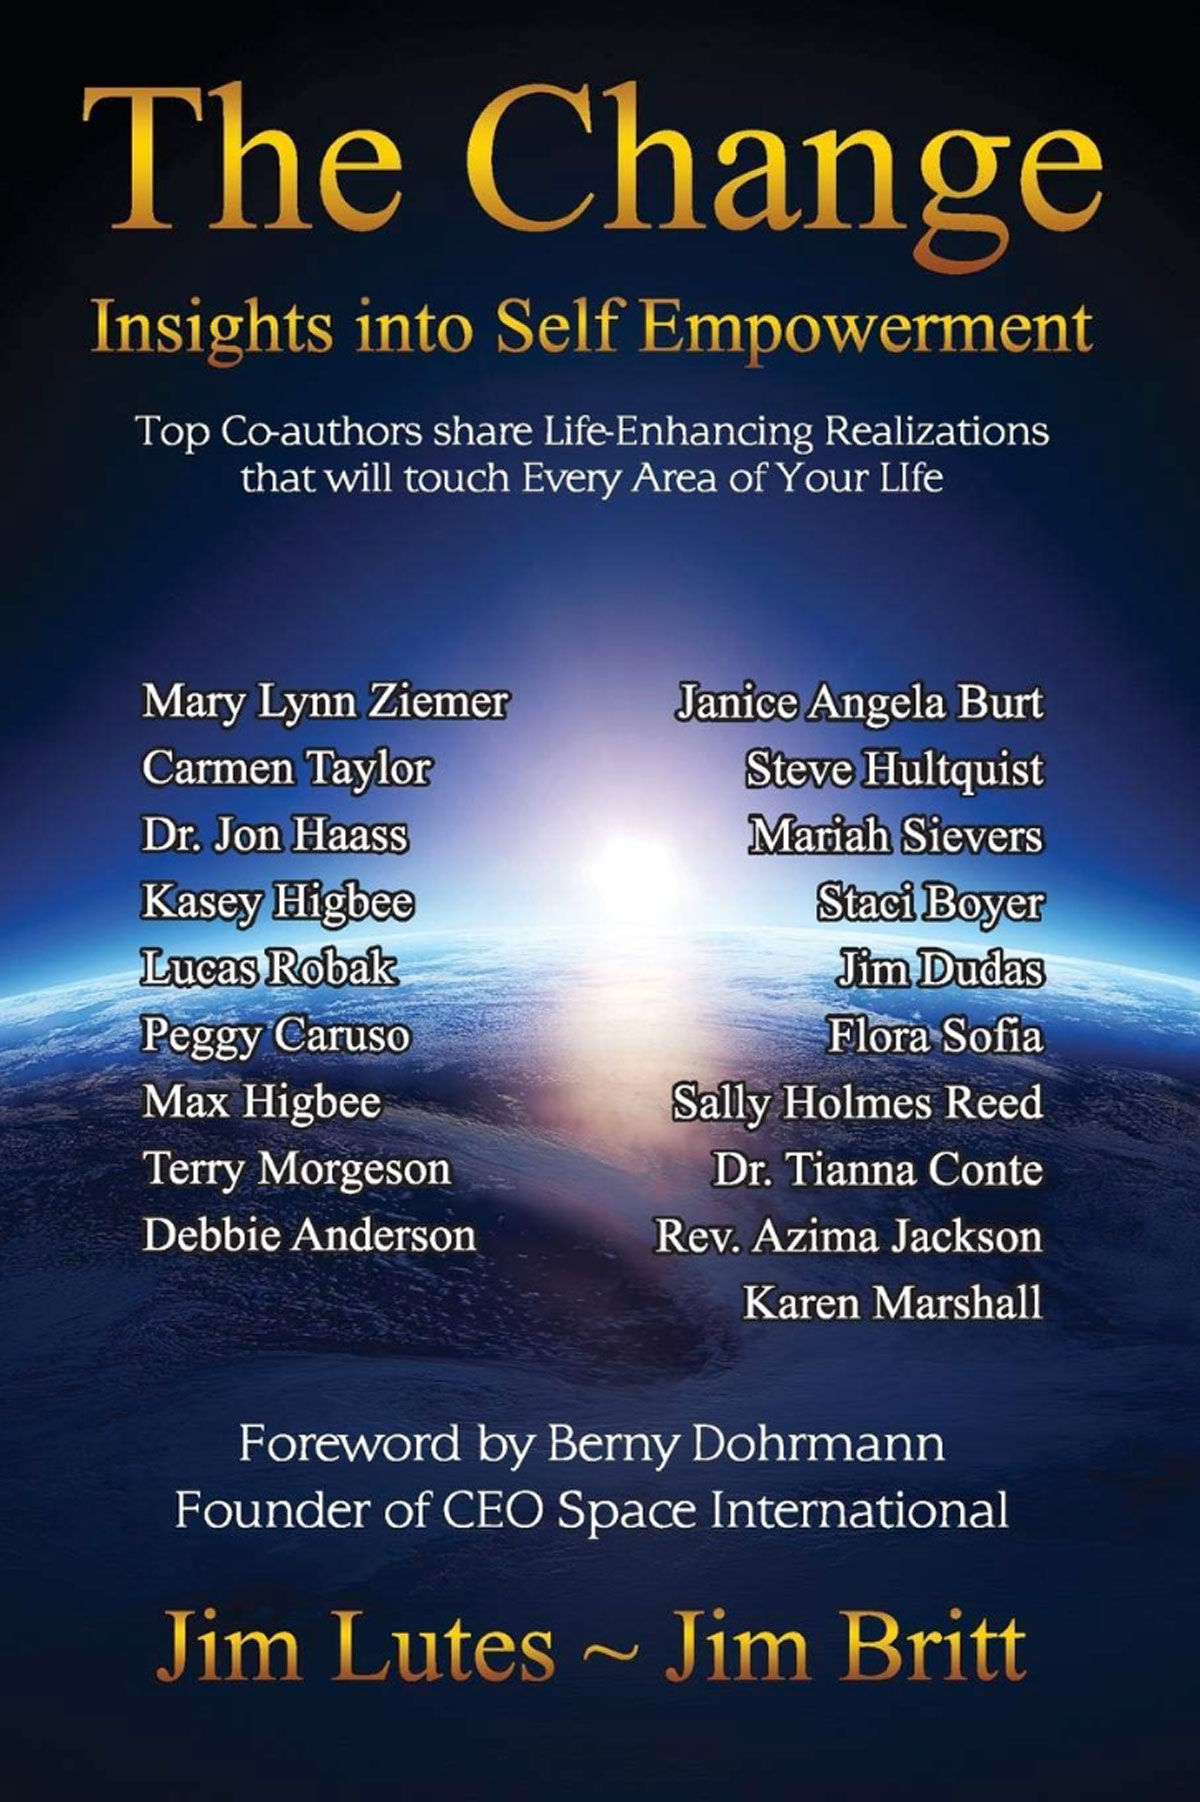 The Change: Insights into Self-Empowerment